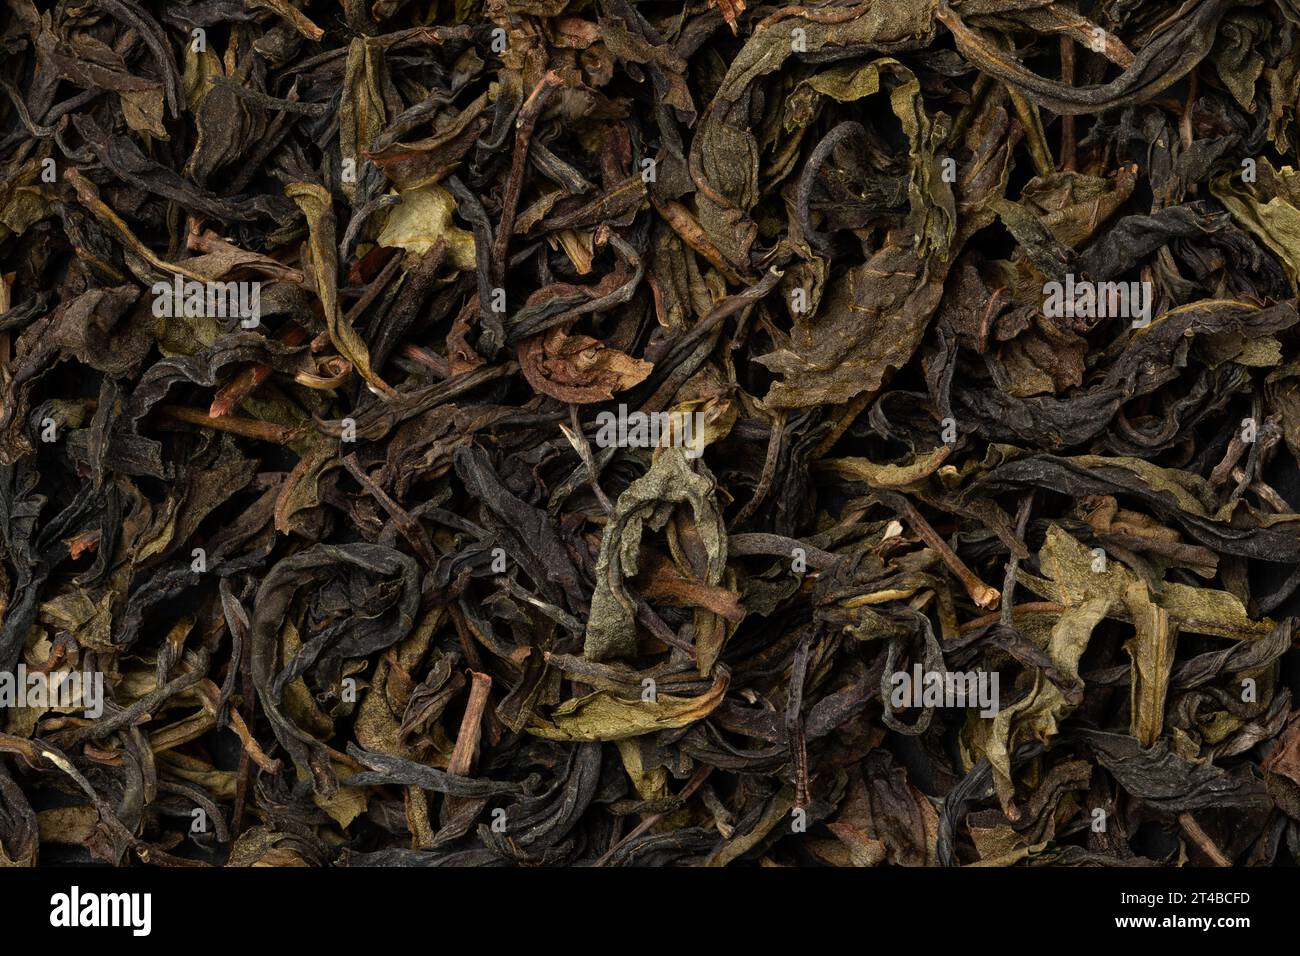 Thai Choui Fong dried tea leaves full frame close up as background Stock Photo